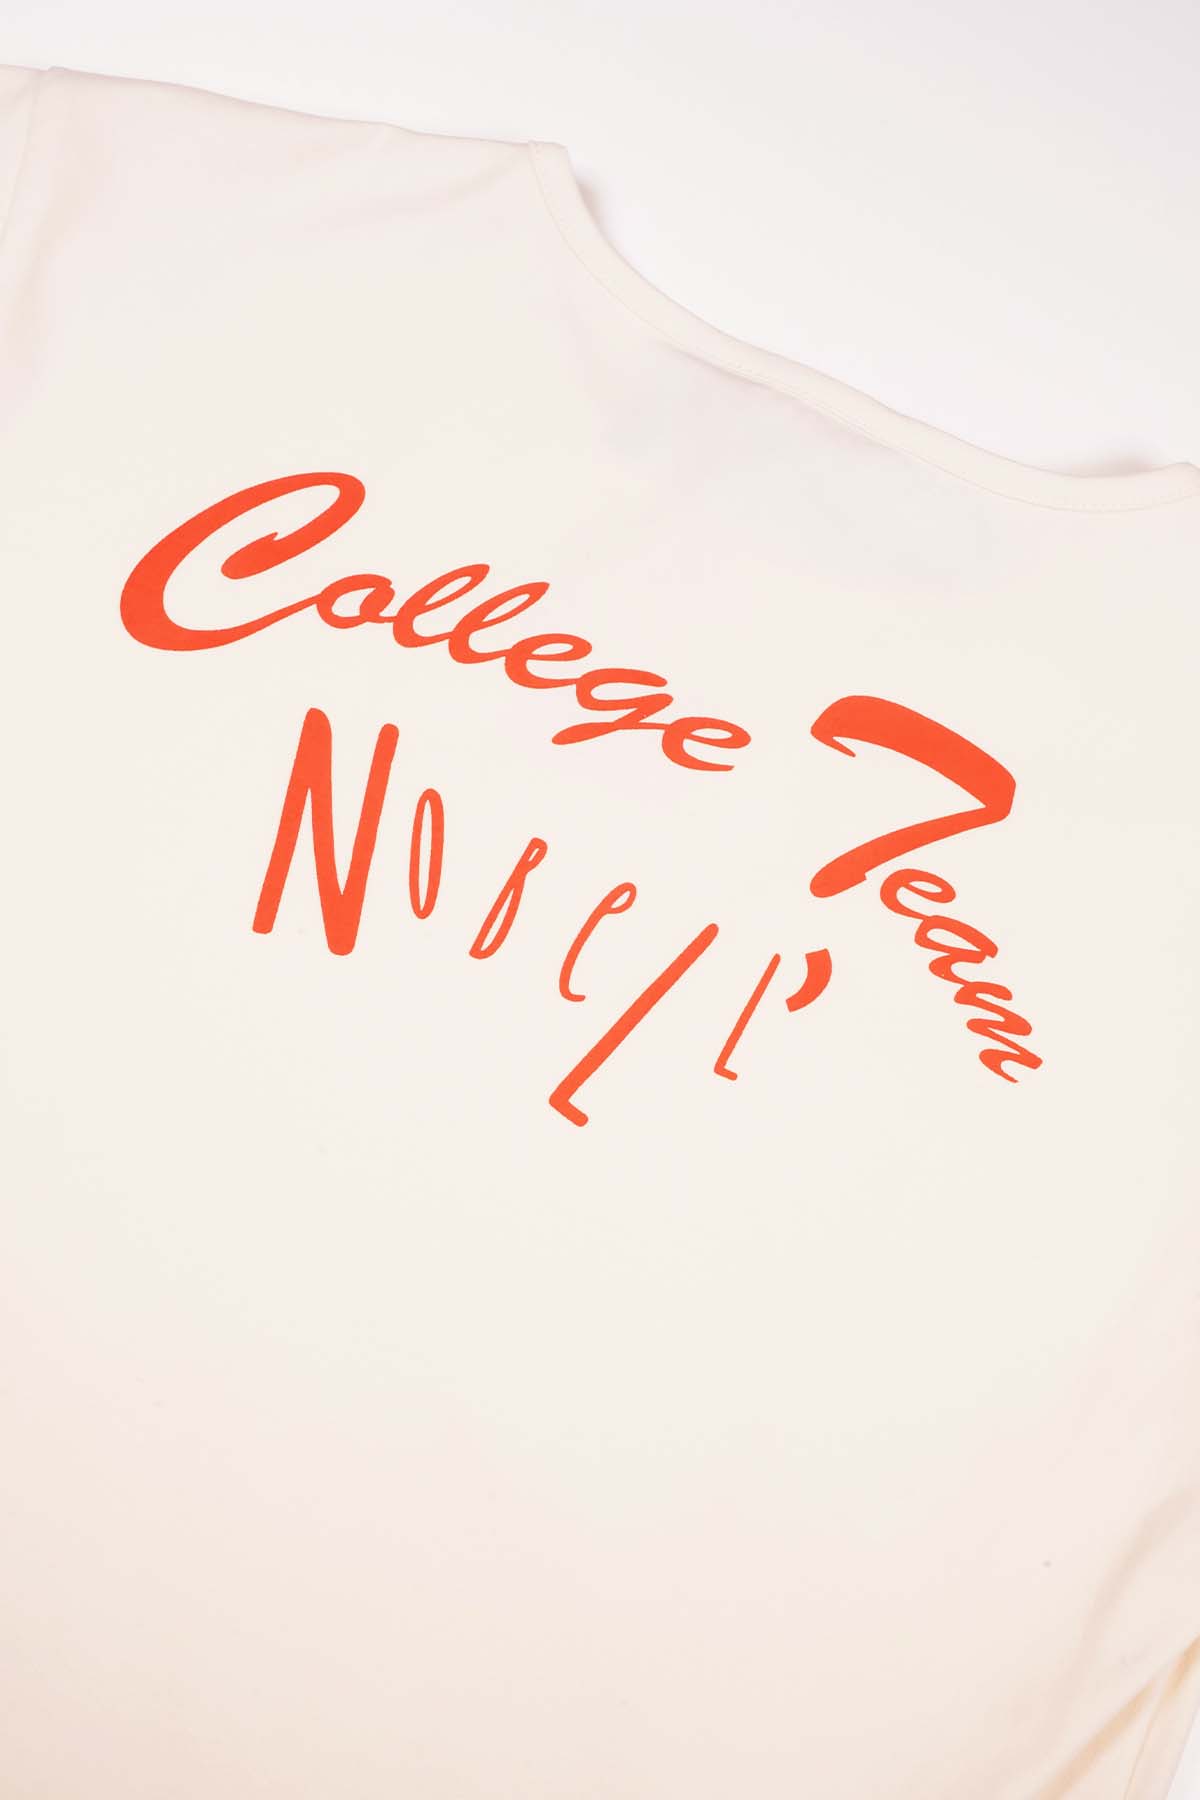 NoBell Kasis Tshirt College Team With Knot